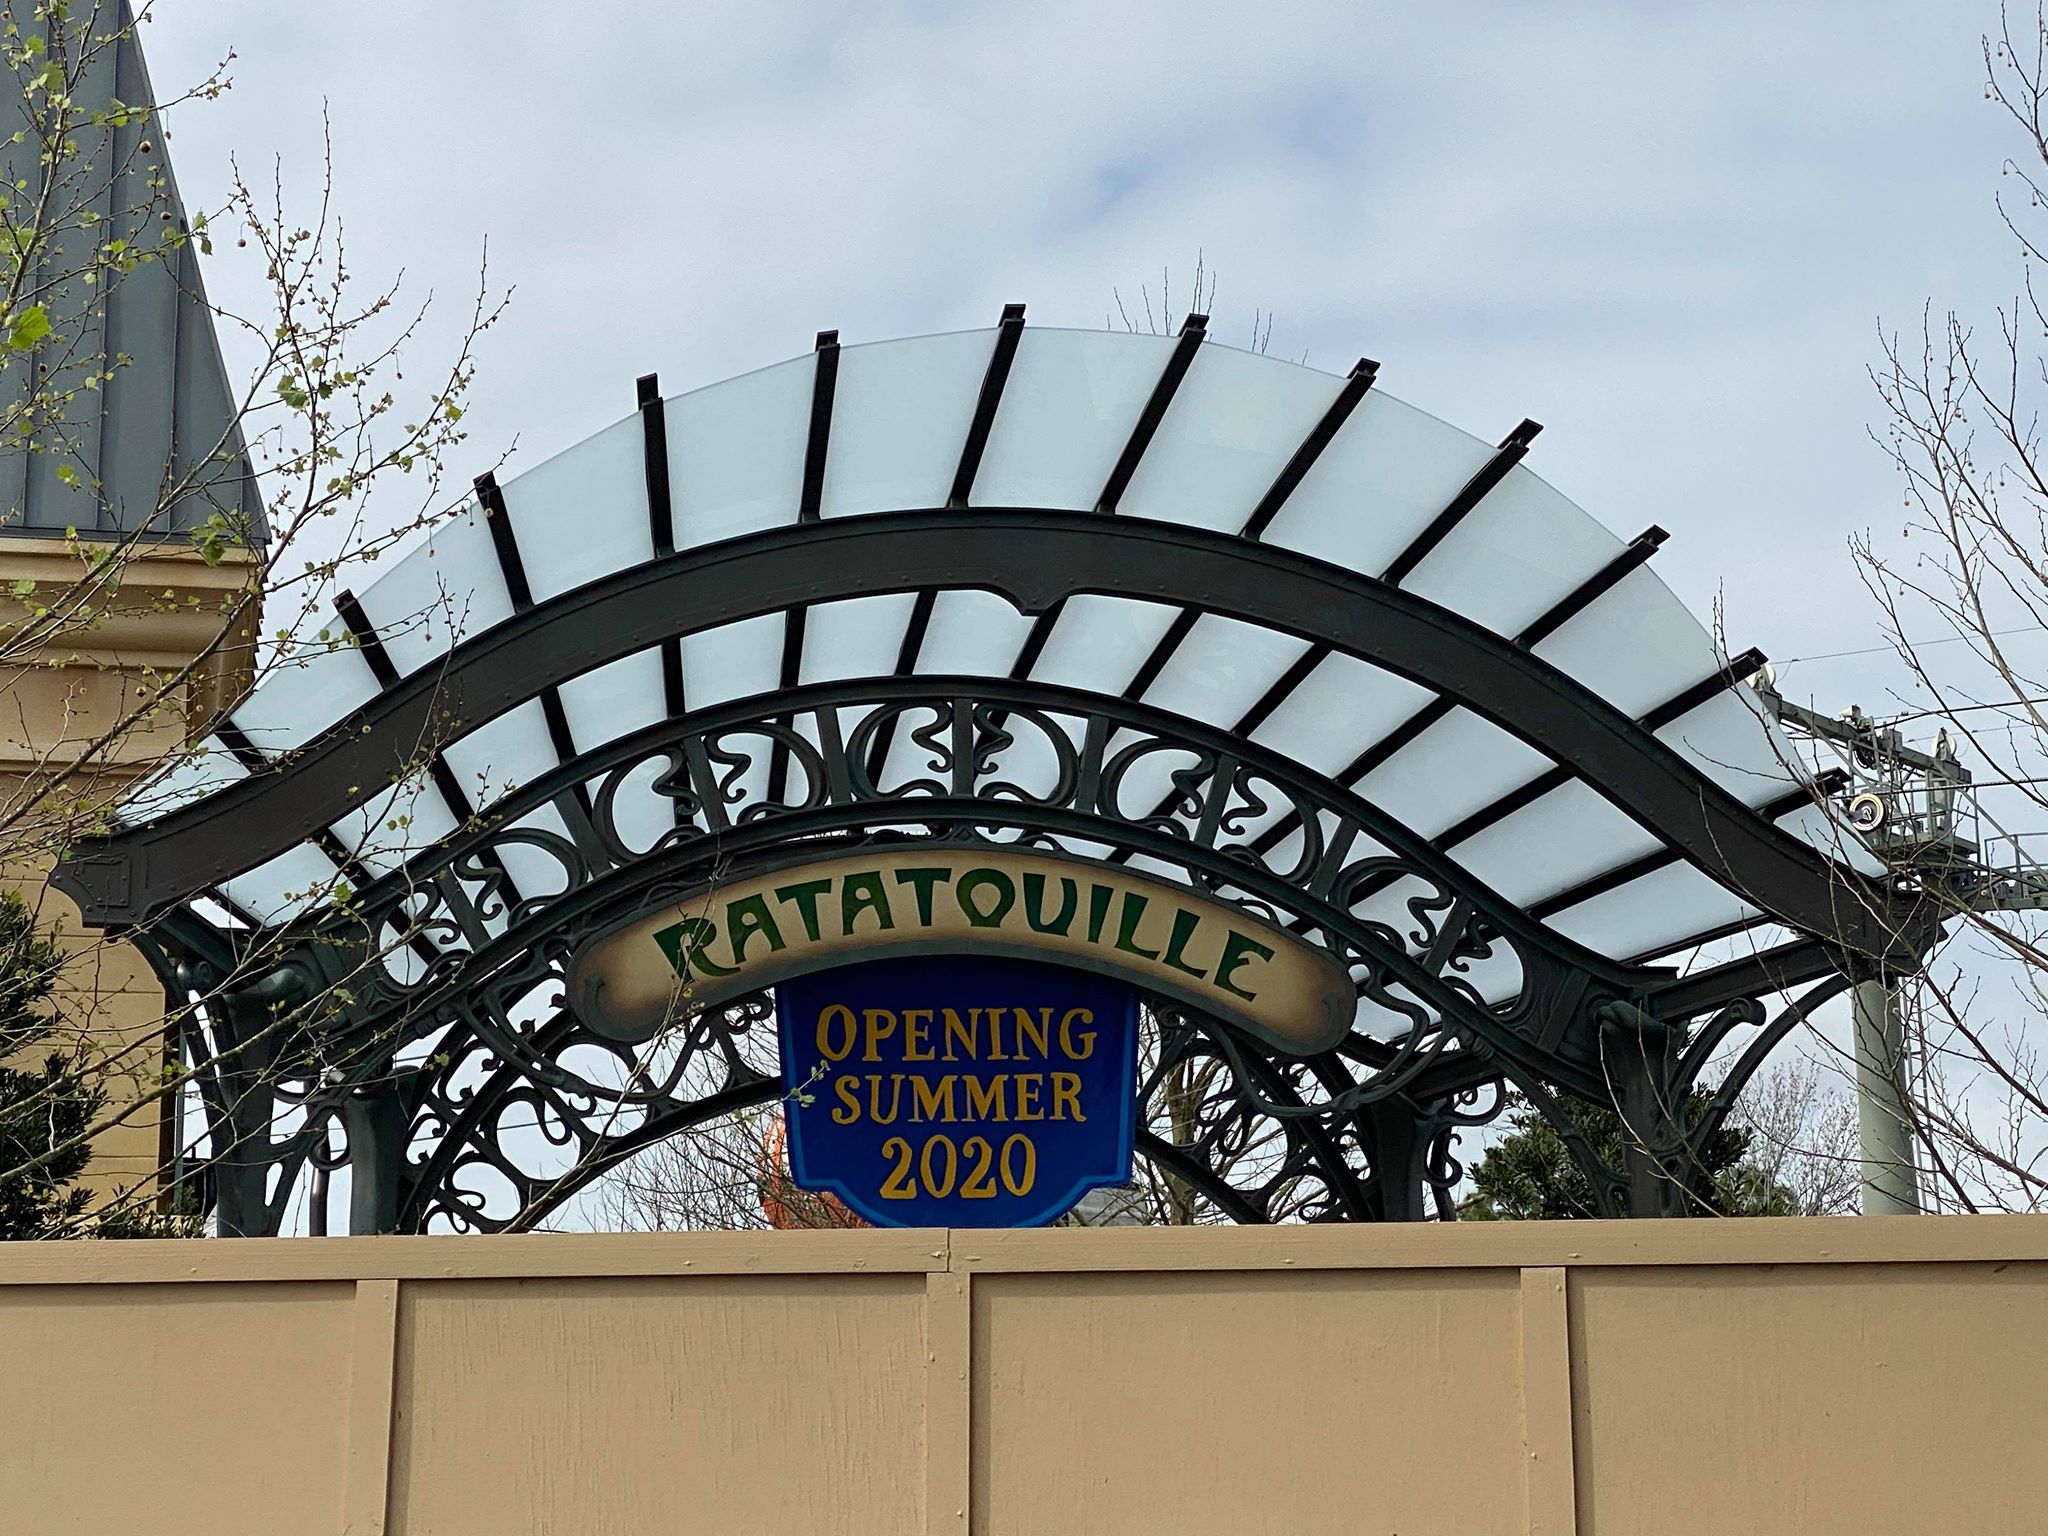 Ratatouille signage has been installed in Epcot